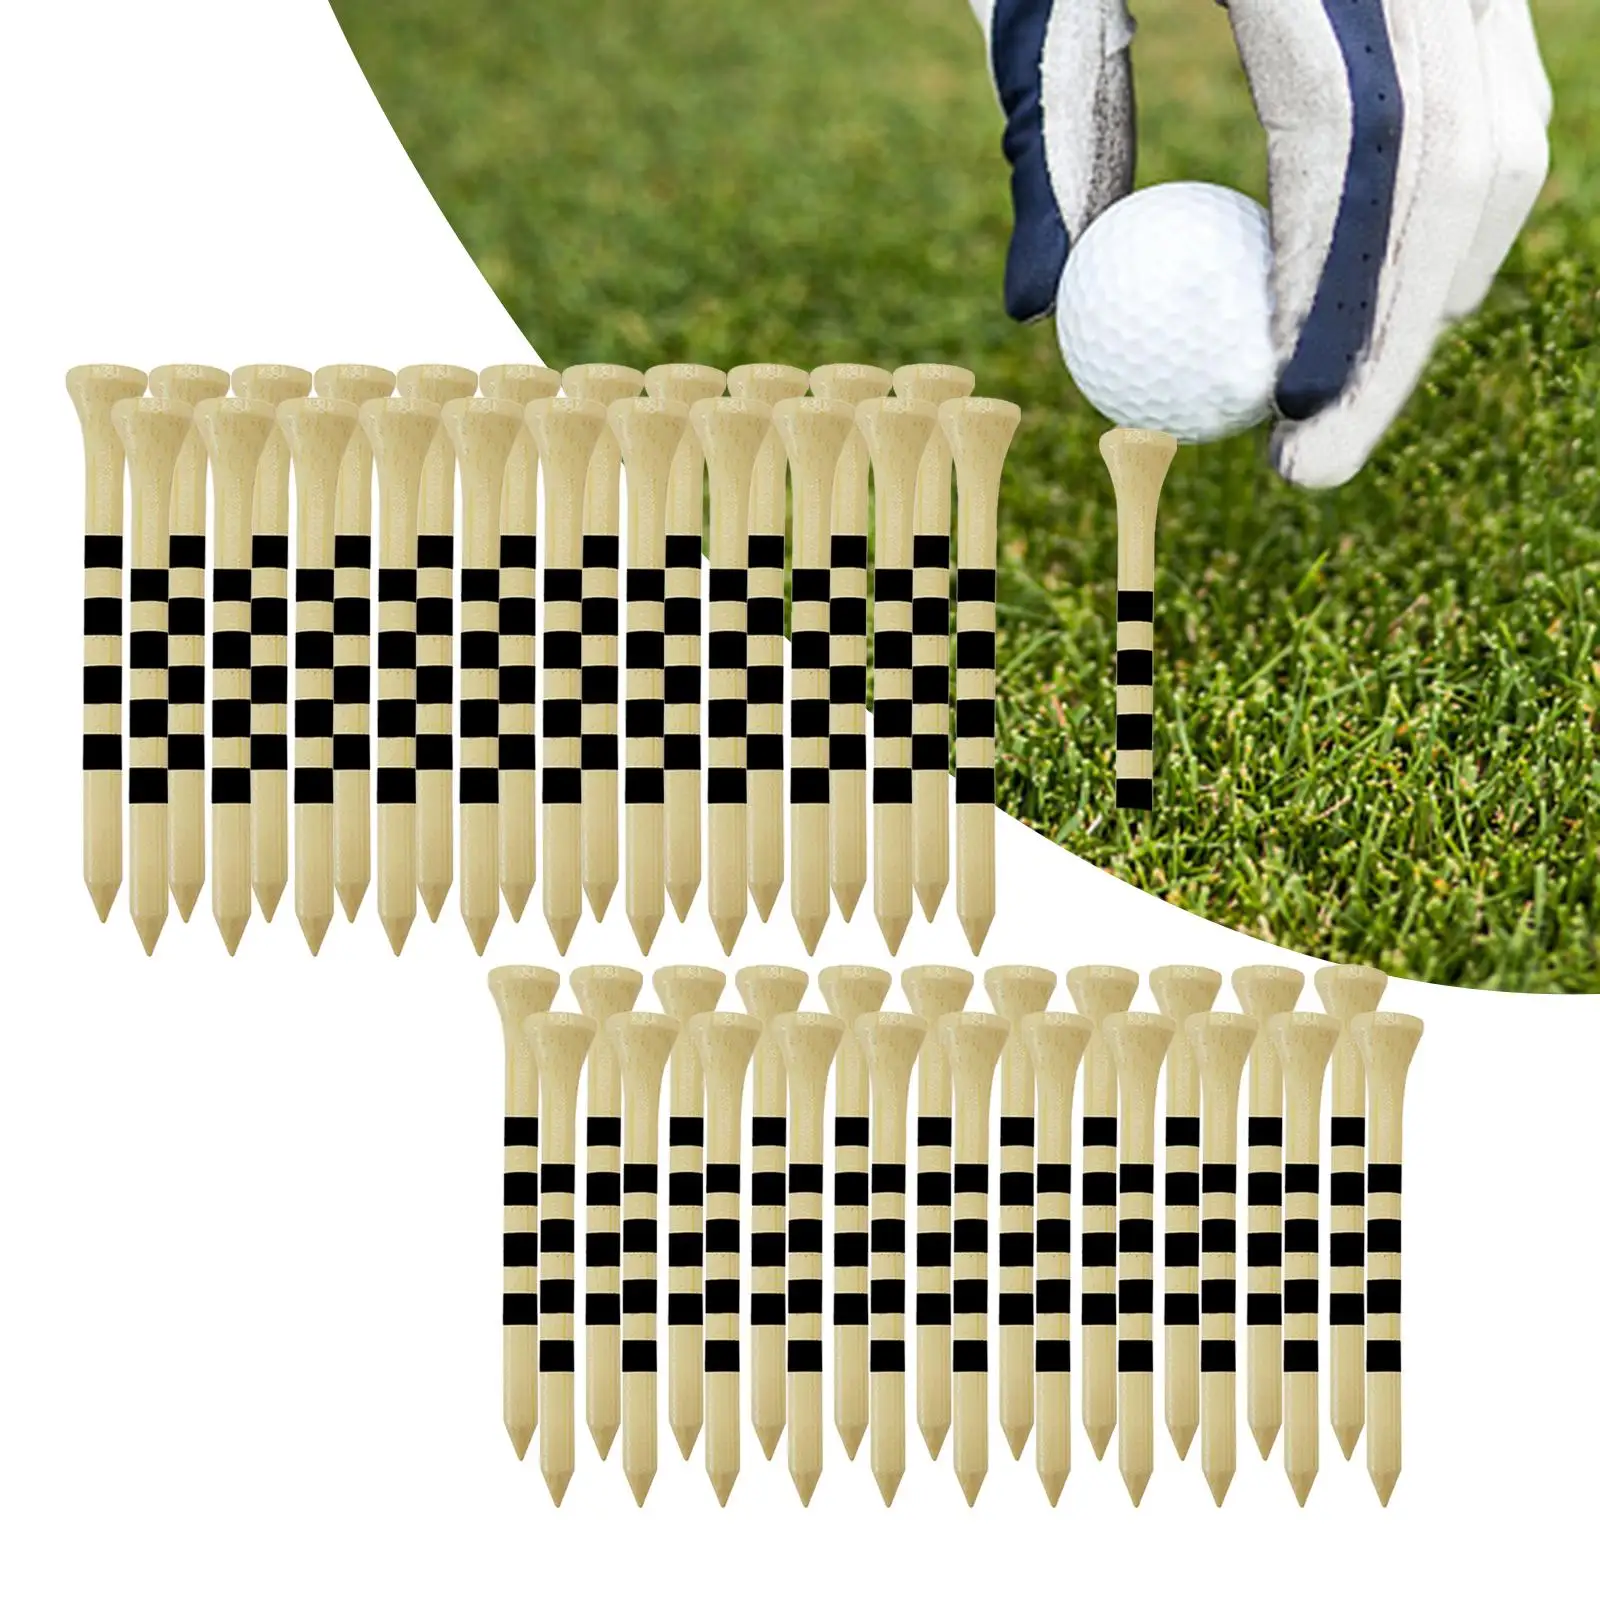 100 Durable Golf Ball Tees, Stronger Support Accessories, Nail Support, Streak